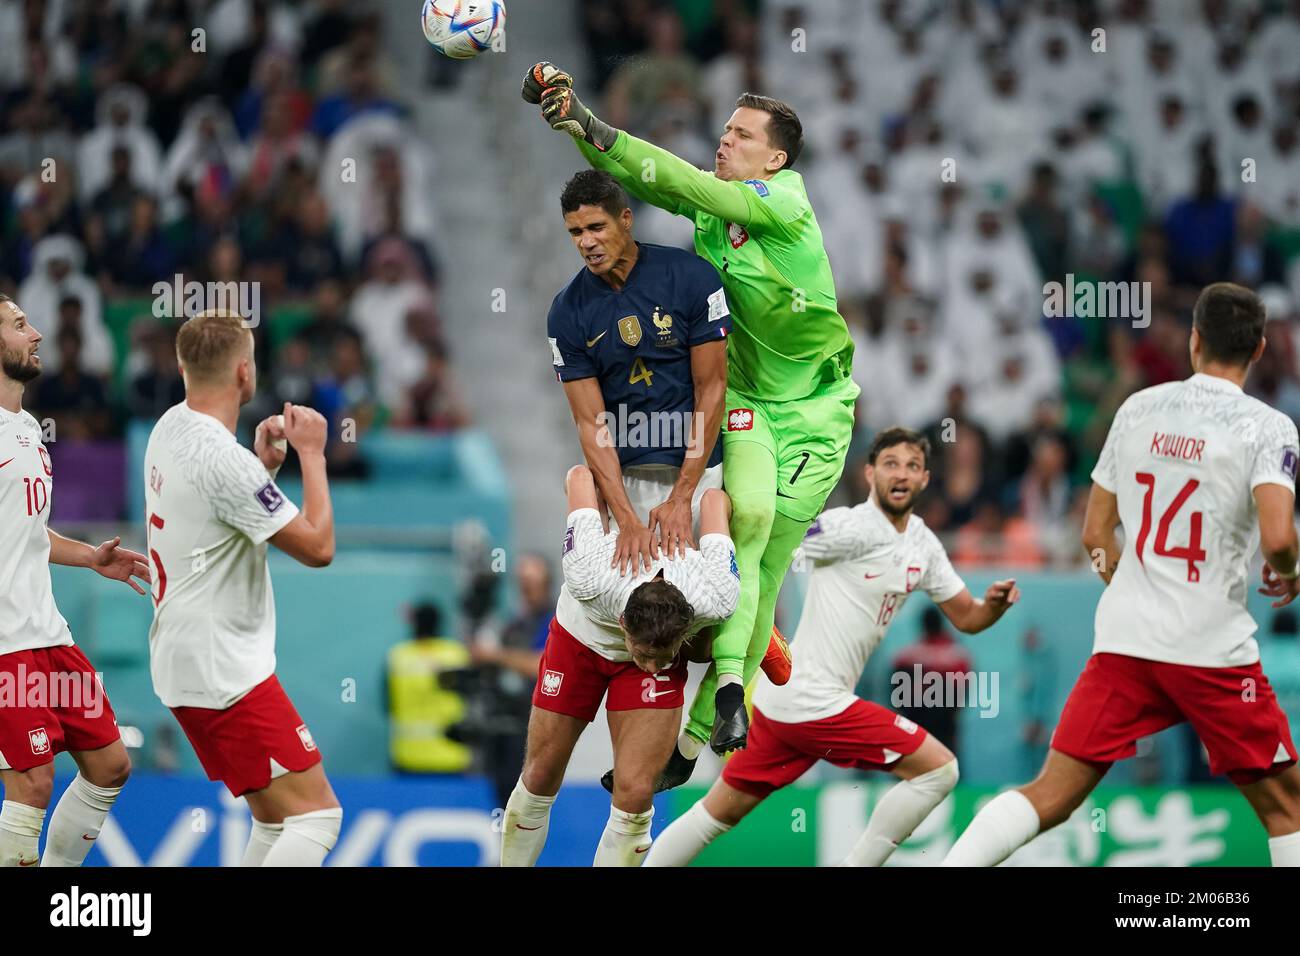 DOHA, QATAR - DECEMBER 4: Player of France  Hugo Lloris saves the ball whilst under pressure during the FIFA World Cup Qatar 2022 Round of 16 match between France and Poland at Al Thumama Stadium on December 4, 2022 in Doha, Qatar. (Photo by Florencia Tan Jun/PxImages) Stock Photo